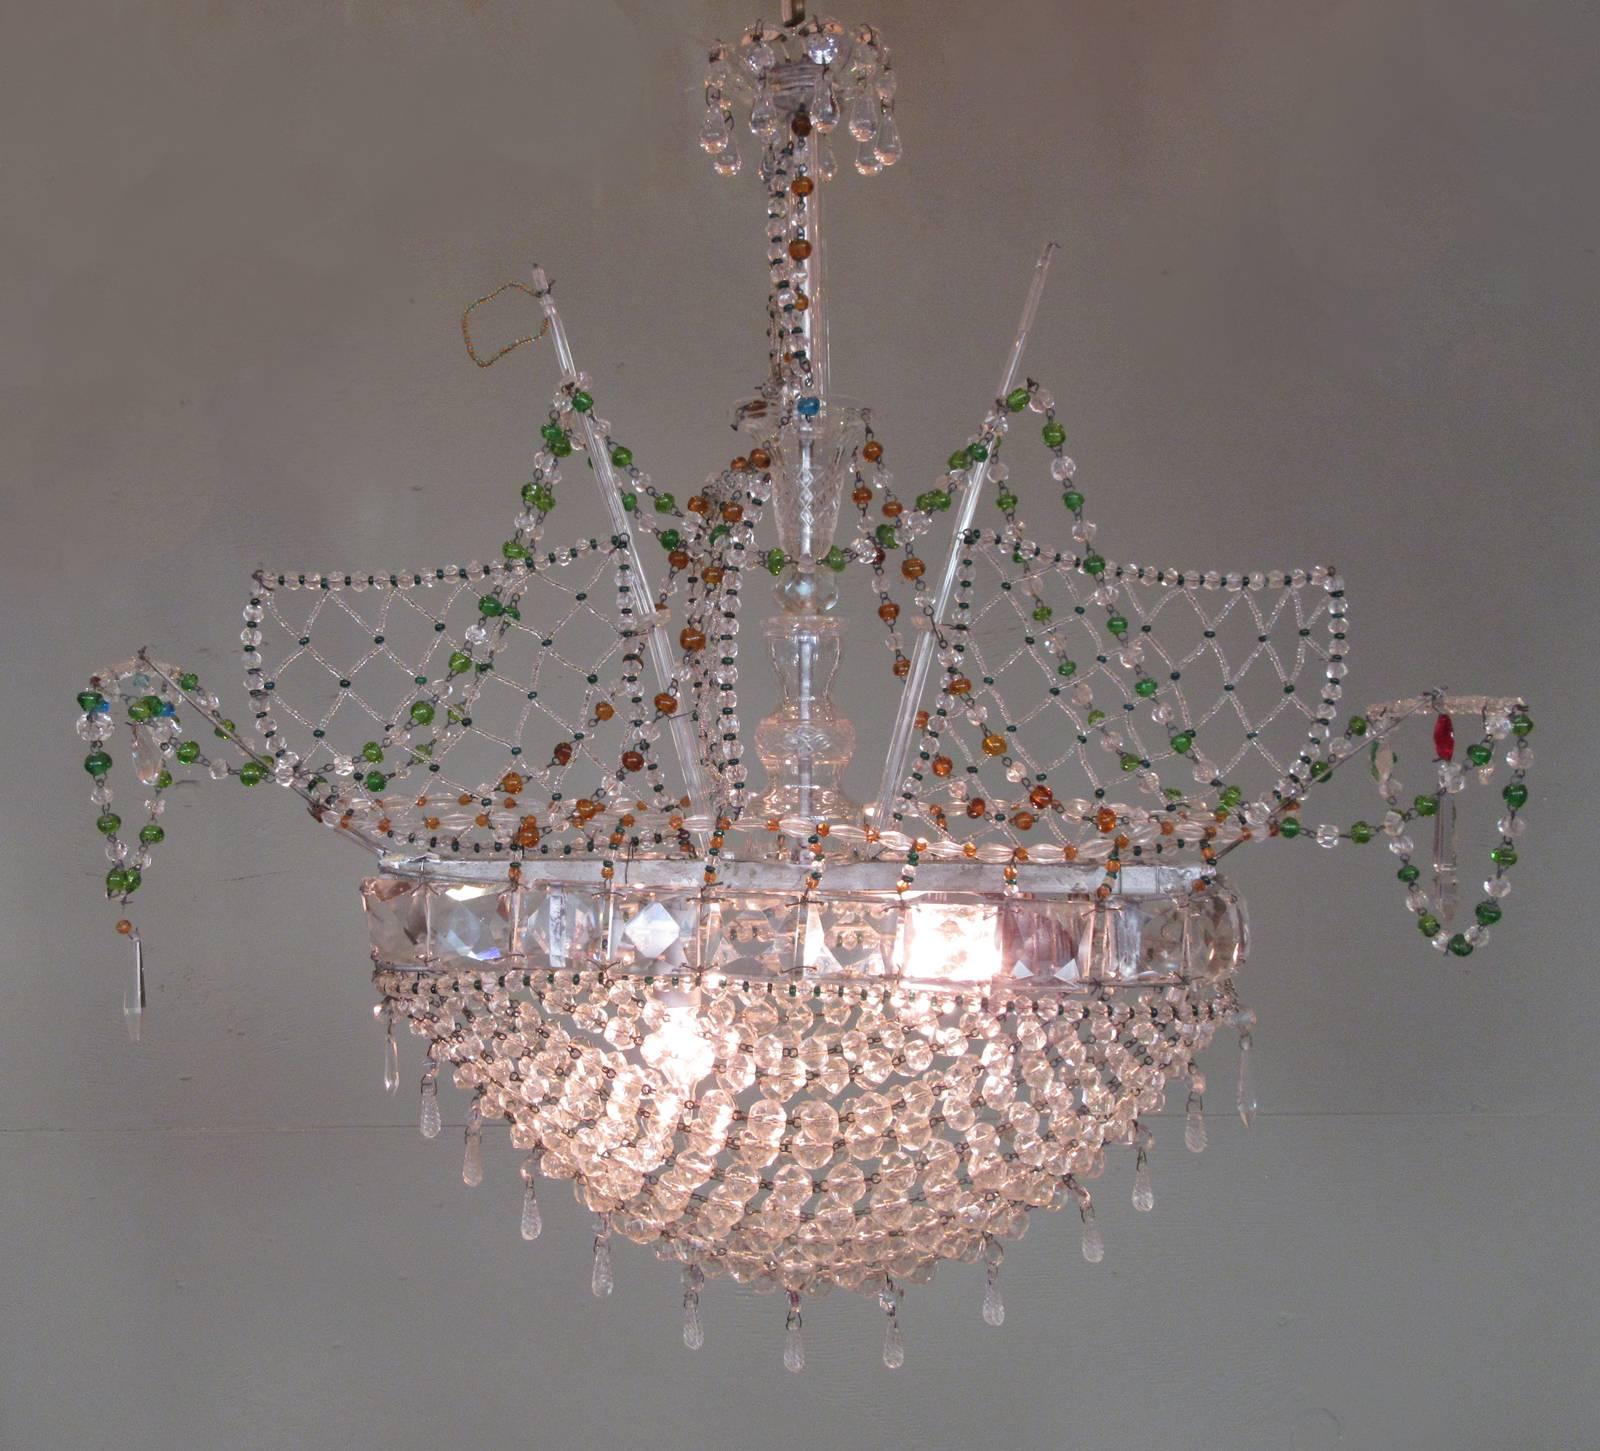 A smaller scale, Venetian crystal ship chandelier, circa 1910, featuring green, blue, orange and red crystals accents on the ship's sails. Recently rewired with new porcelain sockets.